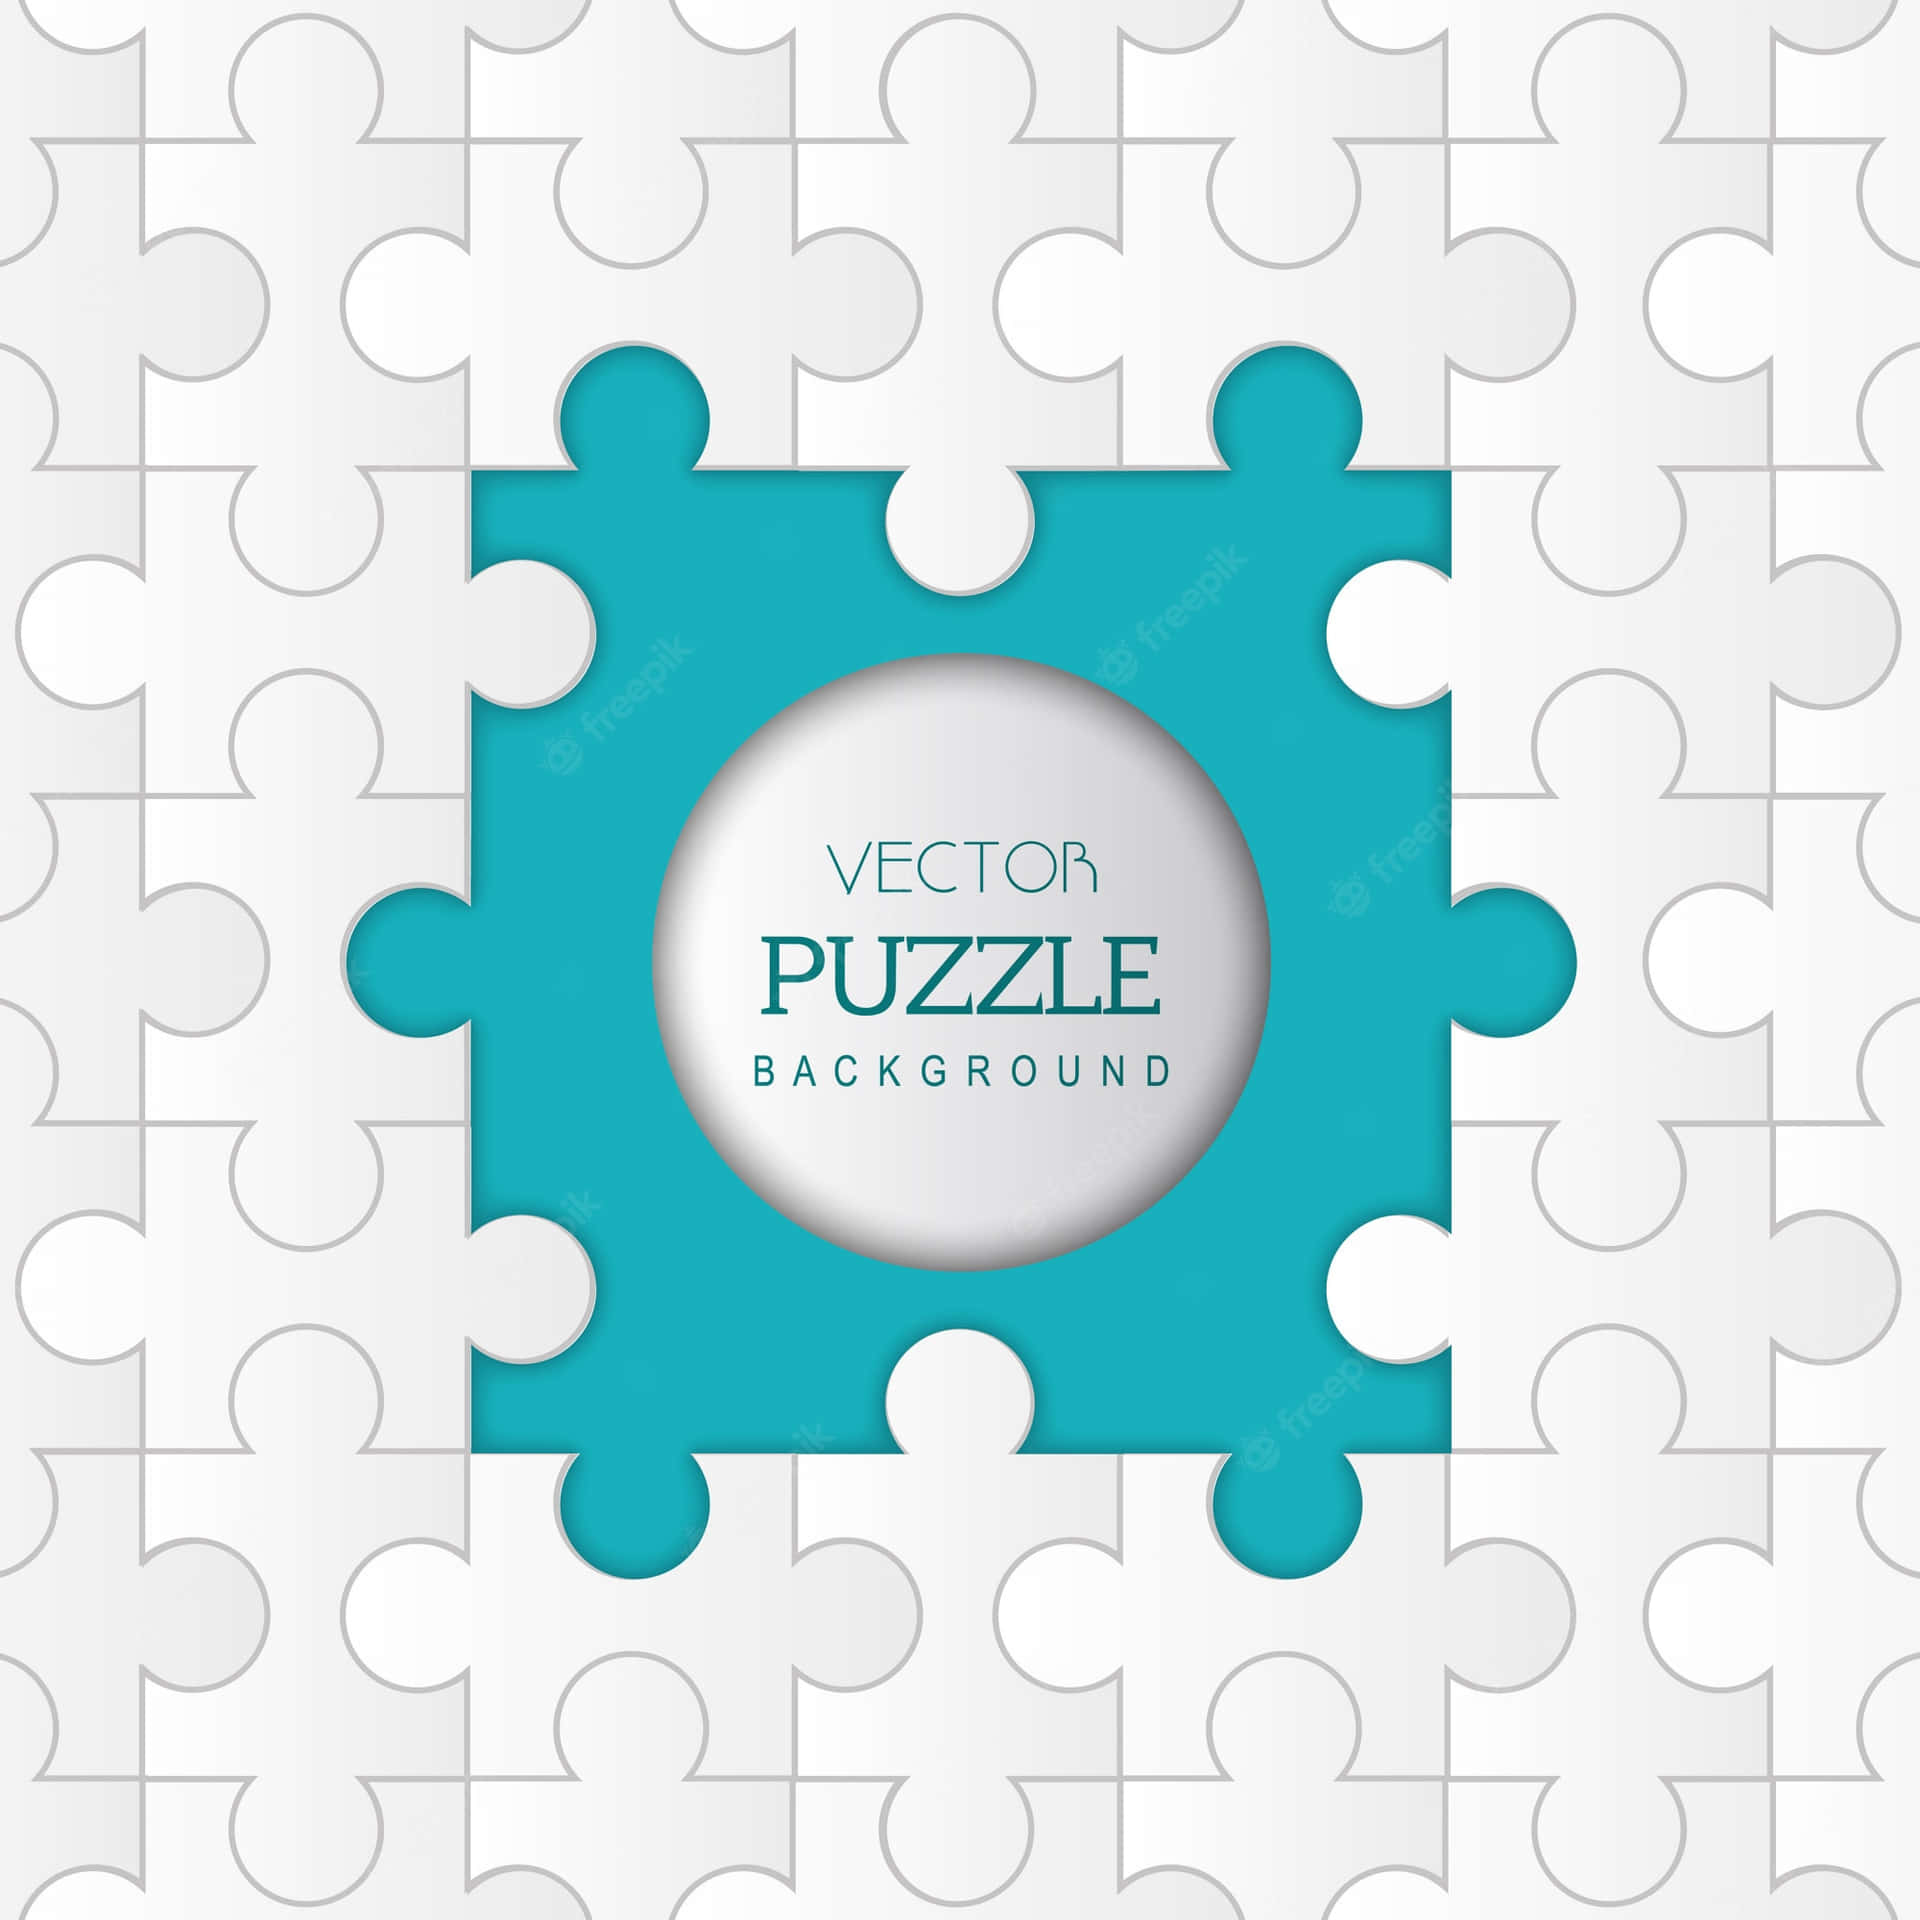 Solve the mystery of the Puzzle!